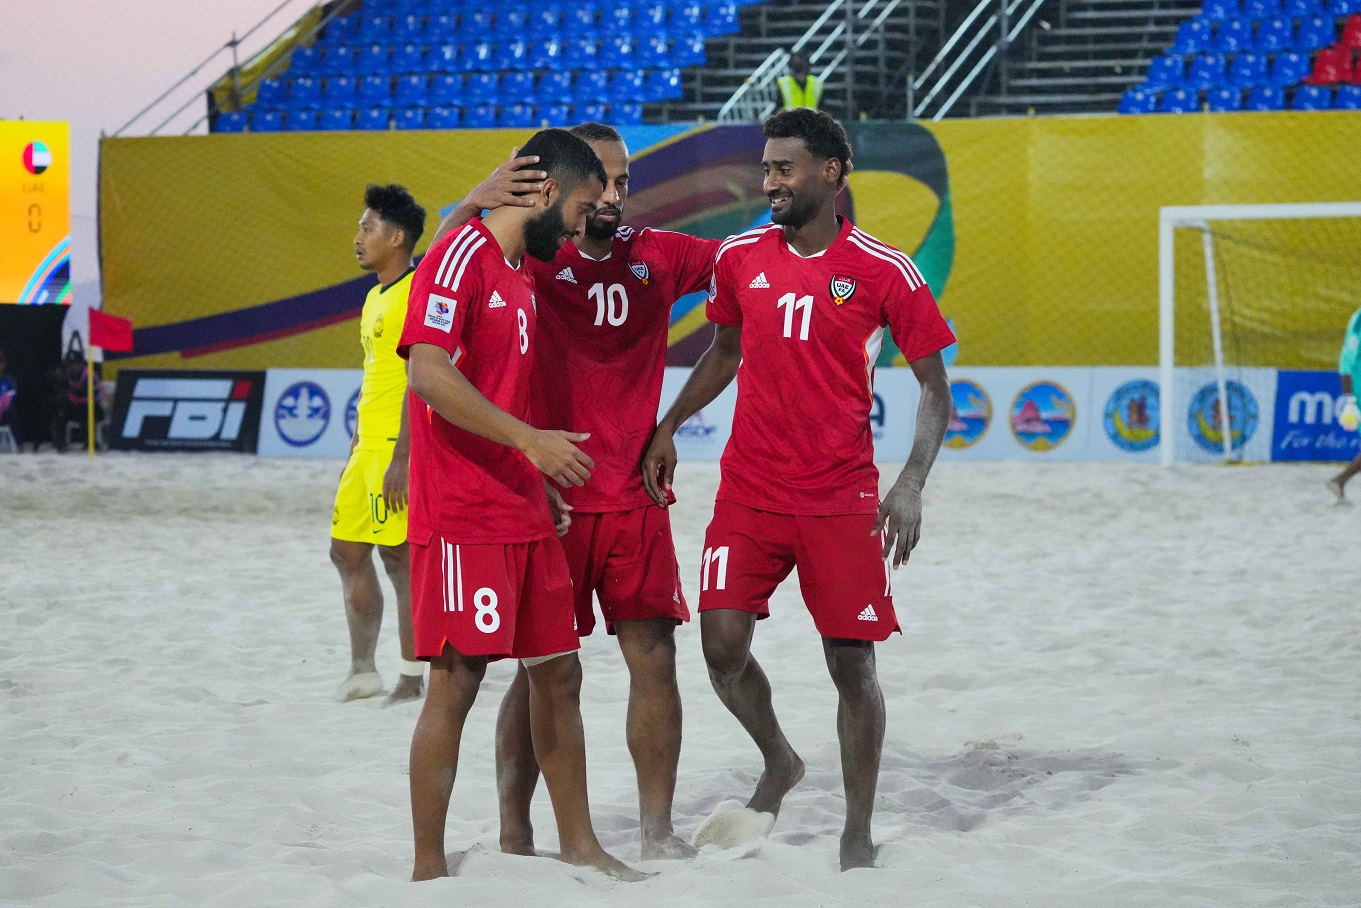 The UAE beach soccer team qualified for the quarter-finals of the Asian Cup